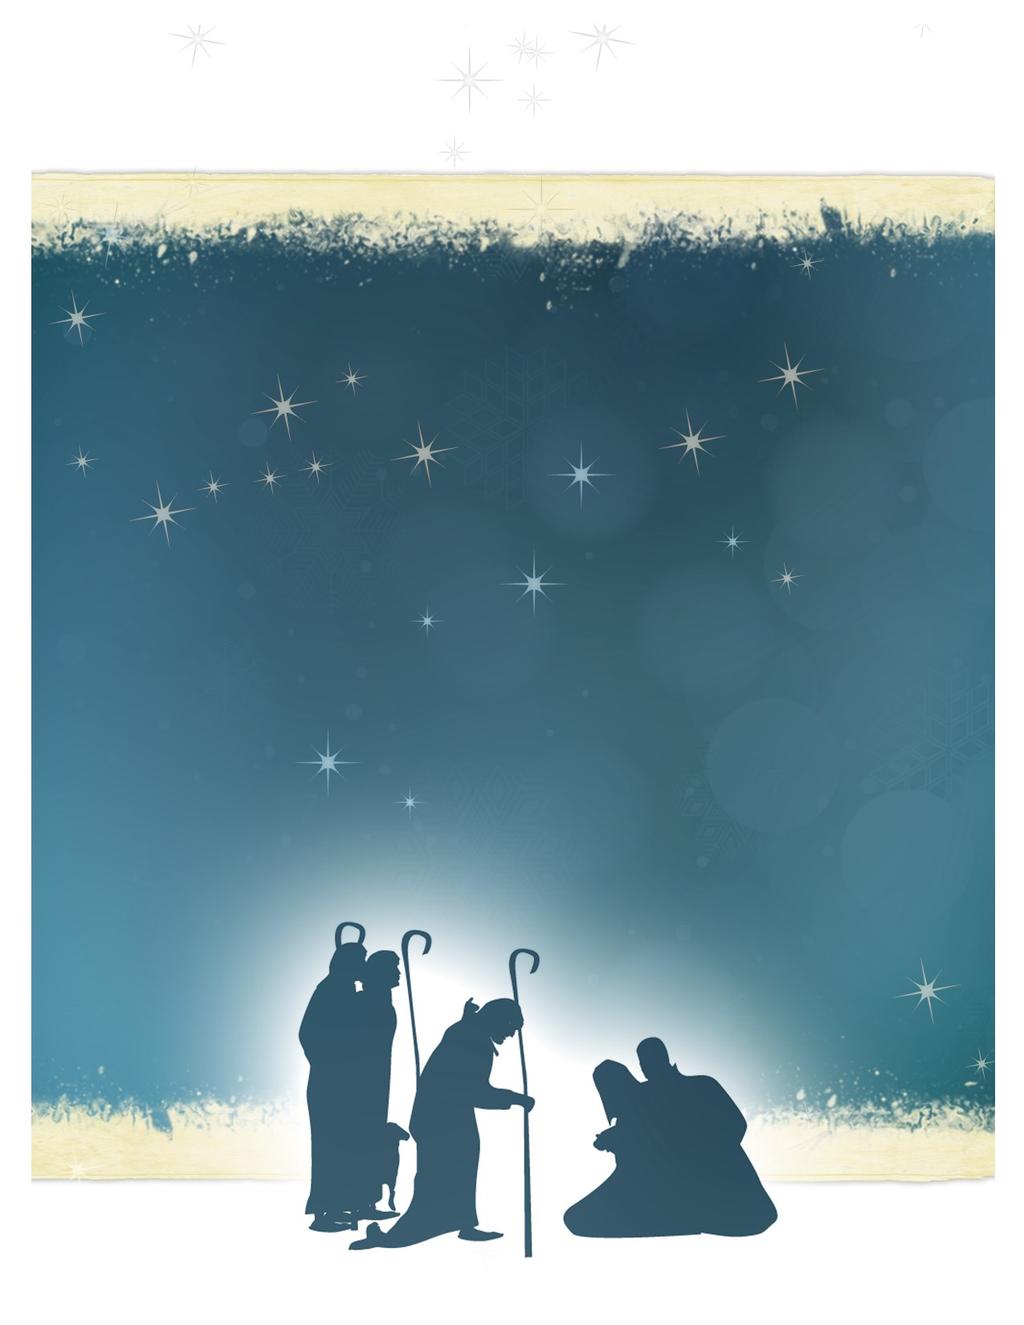 And there were shepherds living out in the fields nearby, keeping watch over their flocks at night.